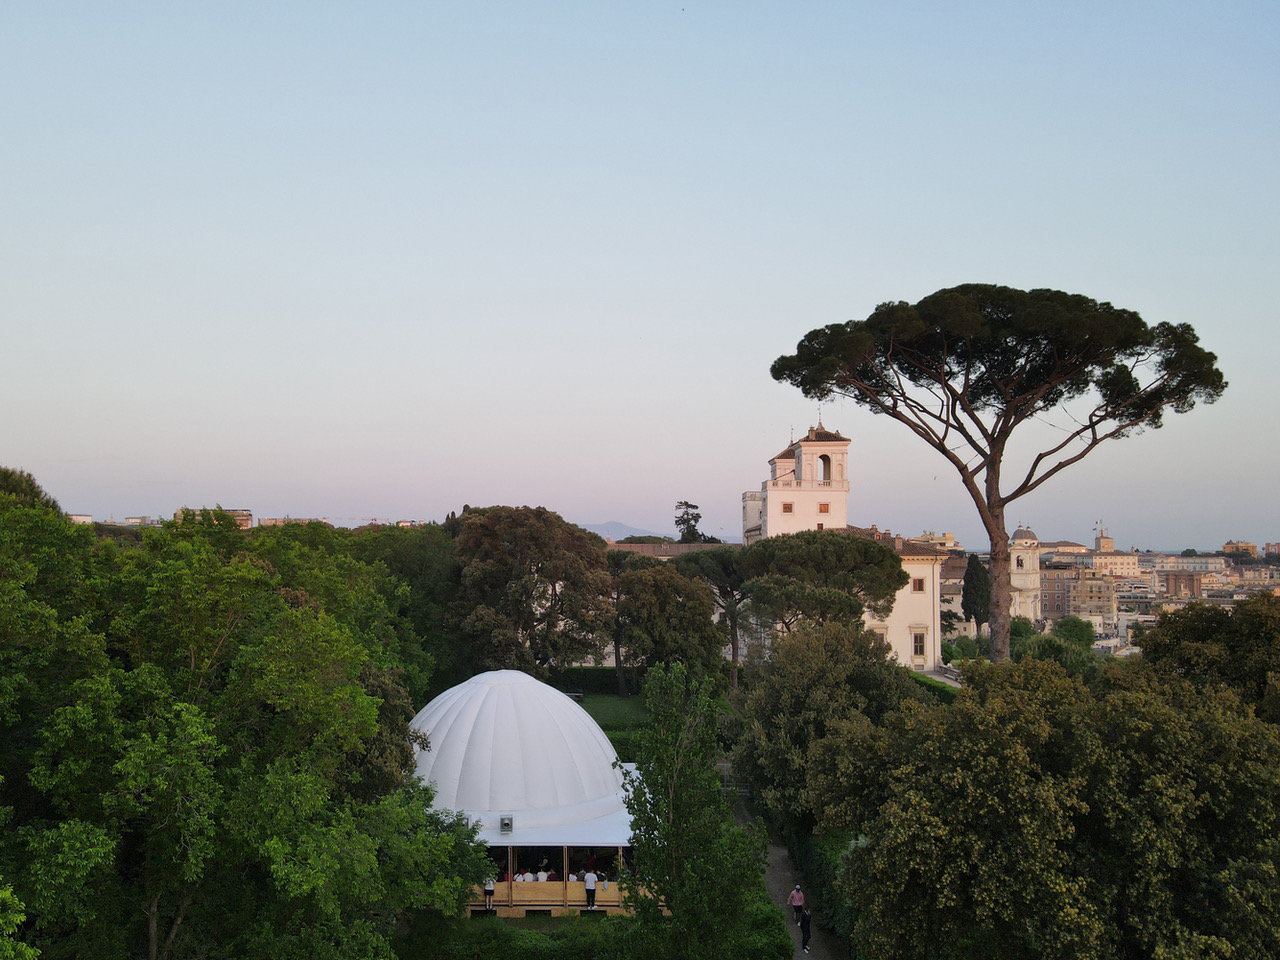 The white canopy of the inflatable ProtoCAMPO pavilion peeks through the trees in Rome's Villa Medici.